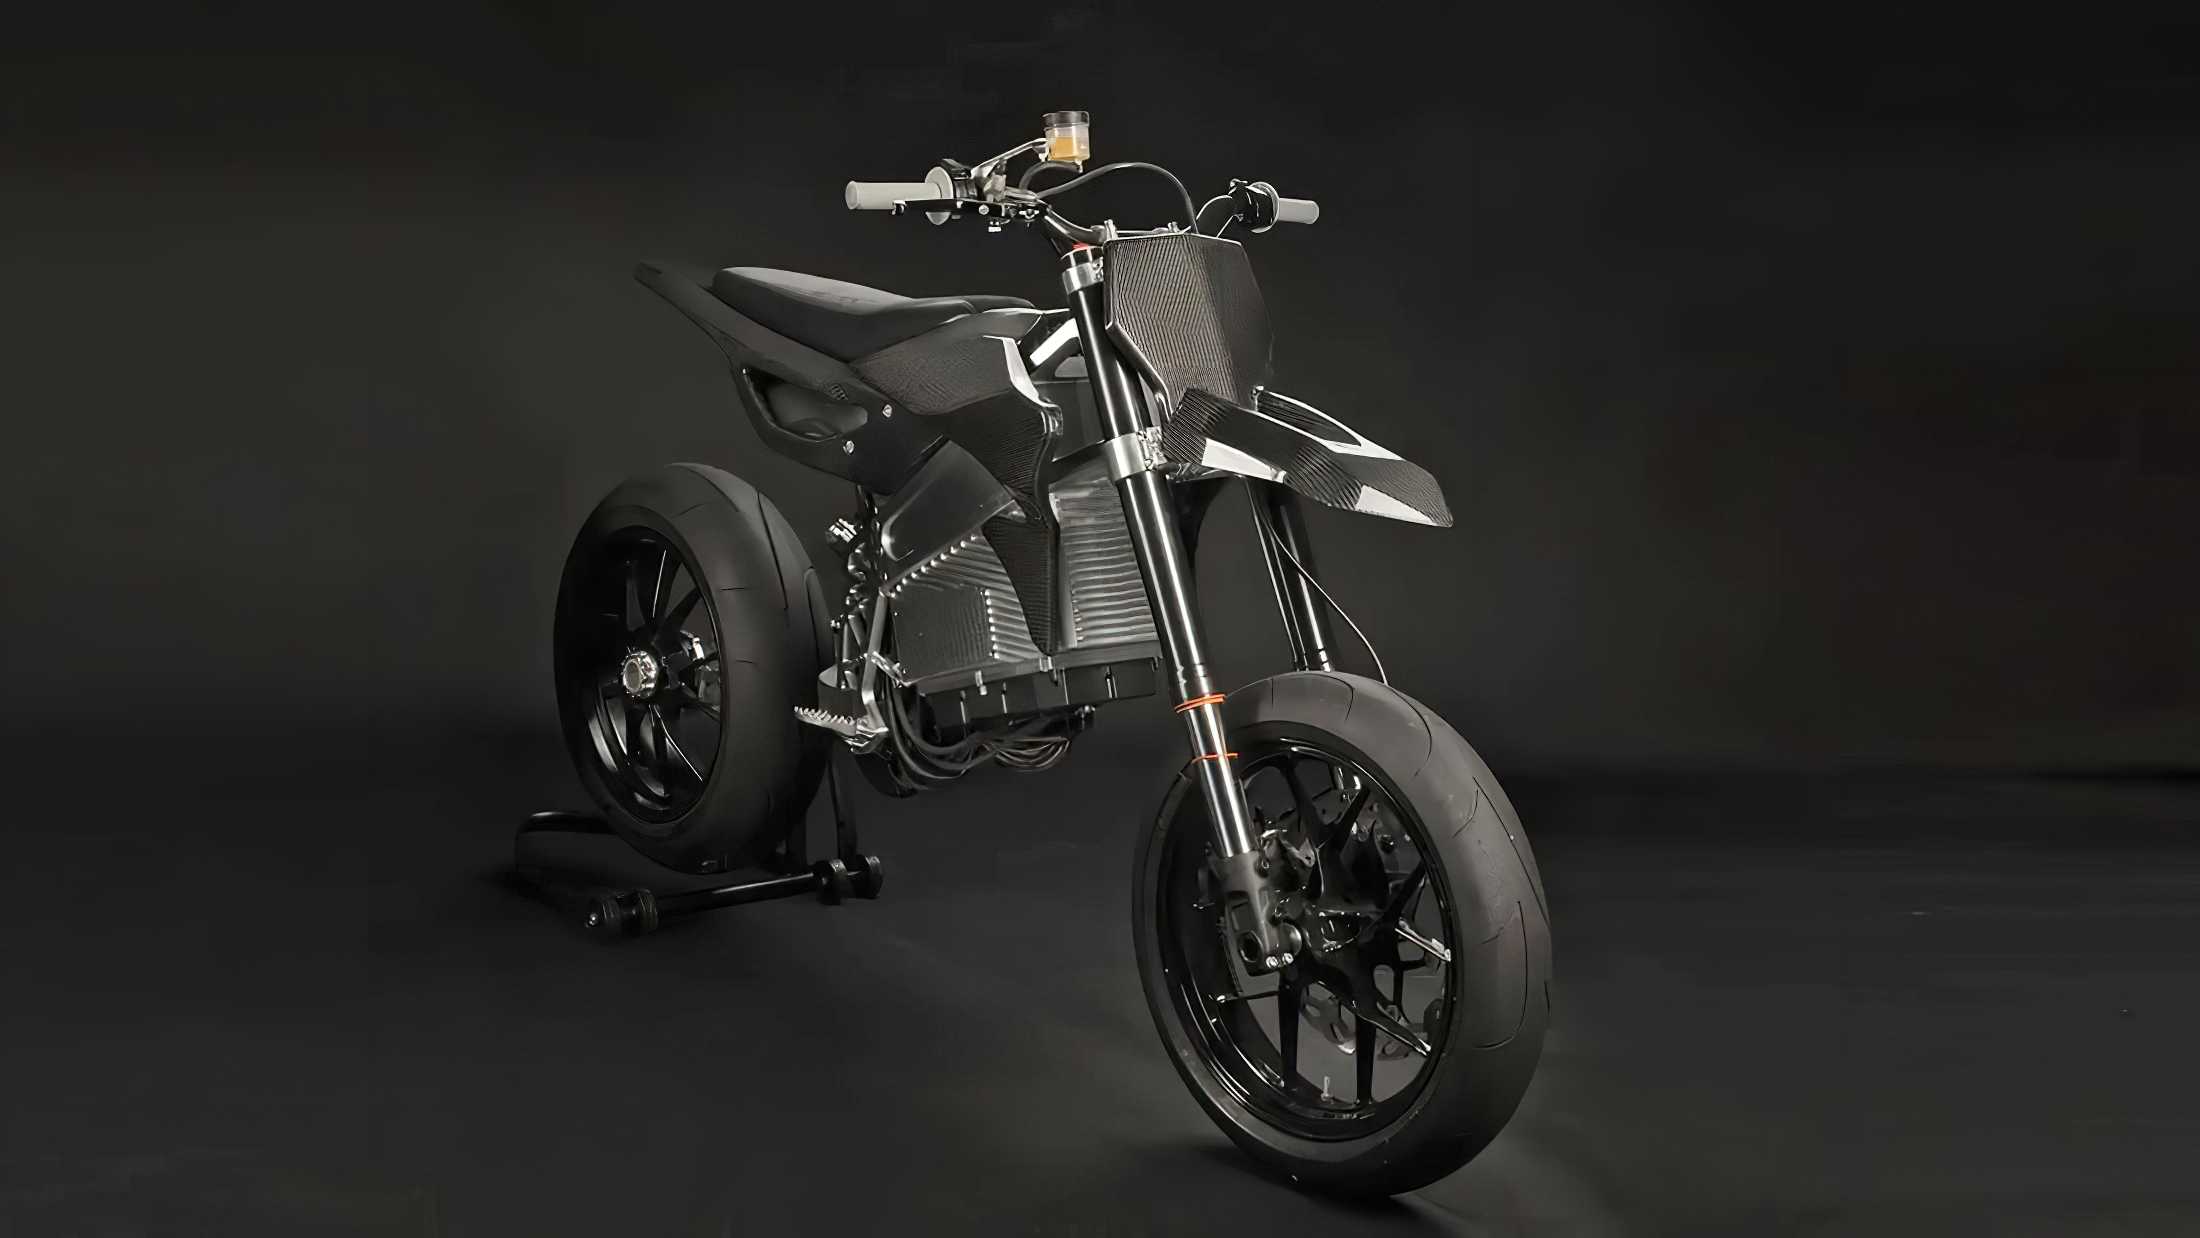 Axiis Liion Prototype - Supermoto with brutal power-to-weight ratio
- also in the MOTORCYCLES.NEWS APP